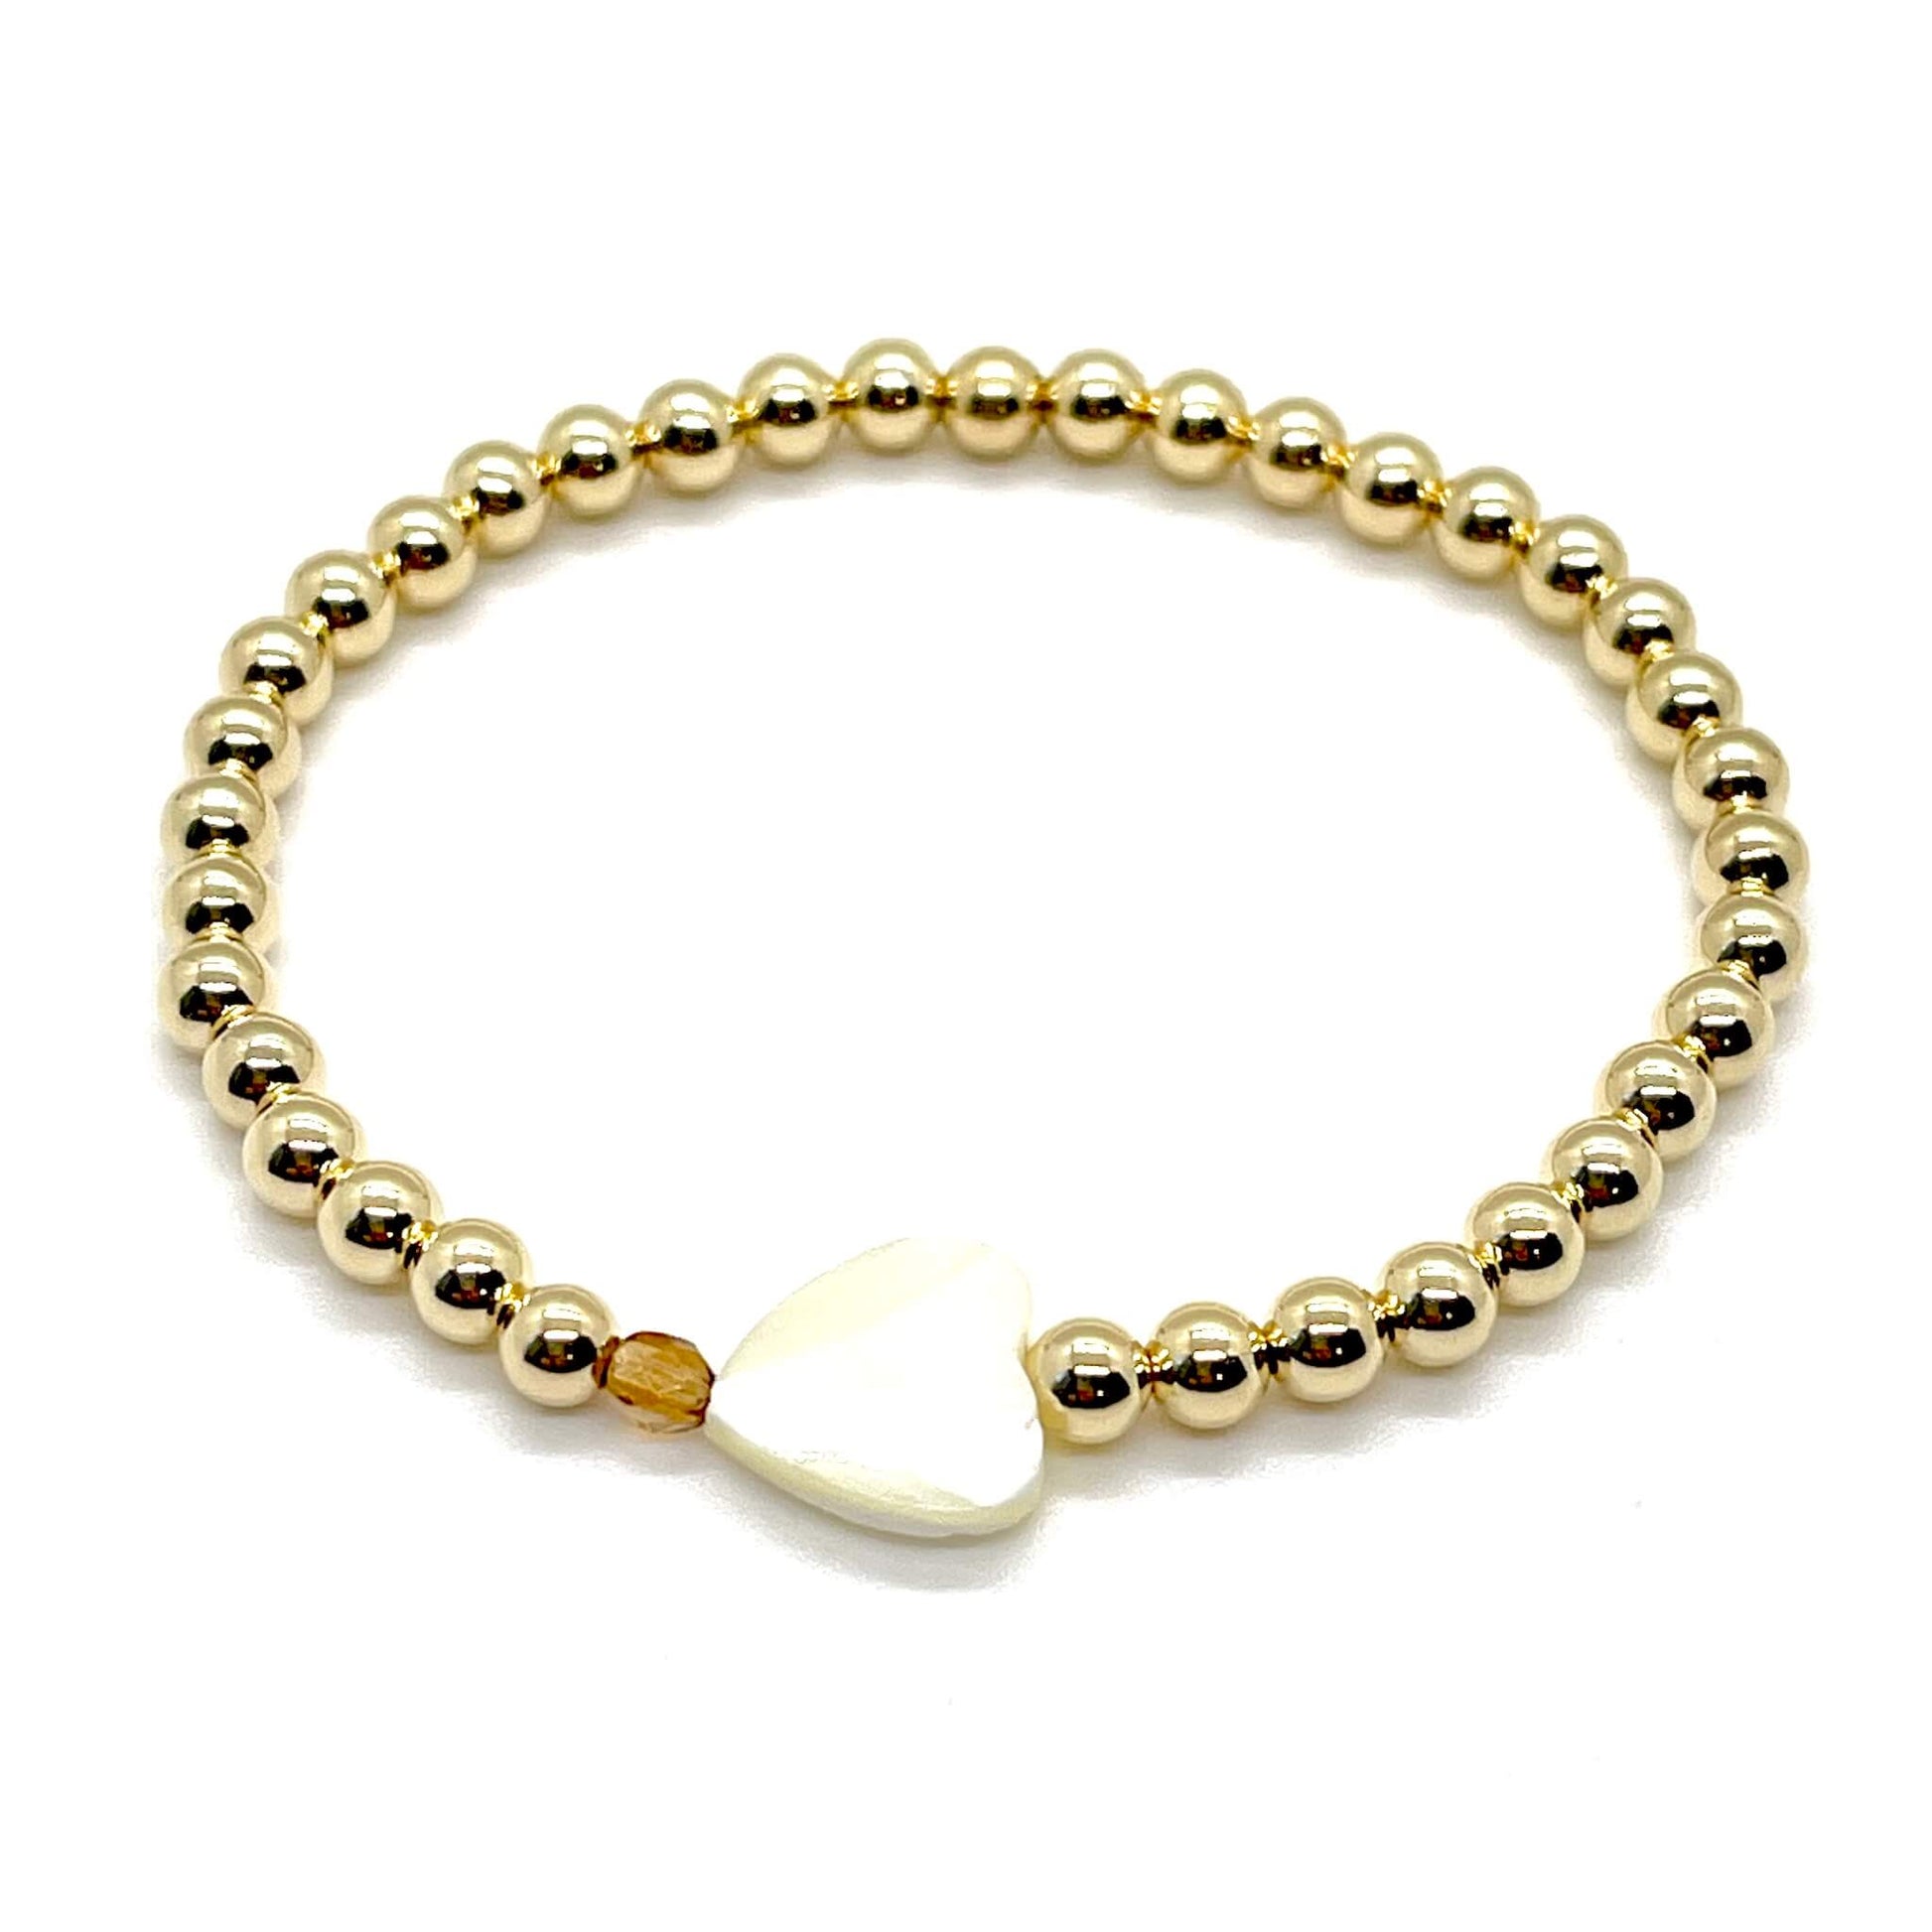 Gold heart bracelet with a mother-of-pearl heart, a small faceted brown topaz crystal, and 4mm 14K gold filled beads.